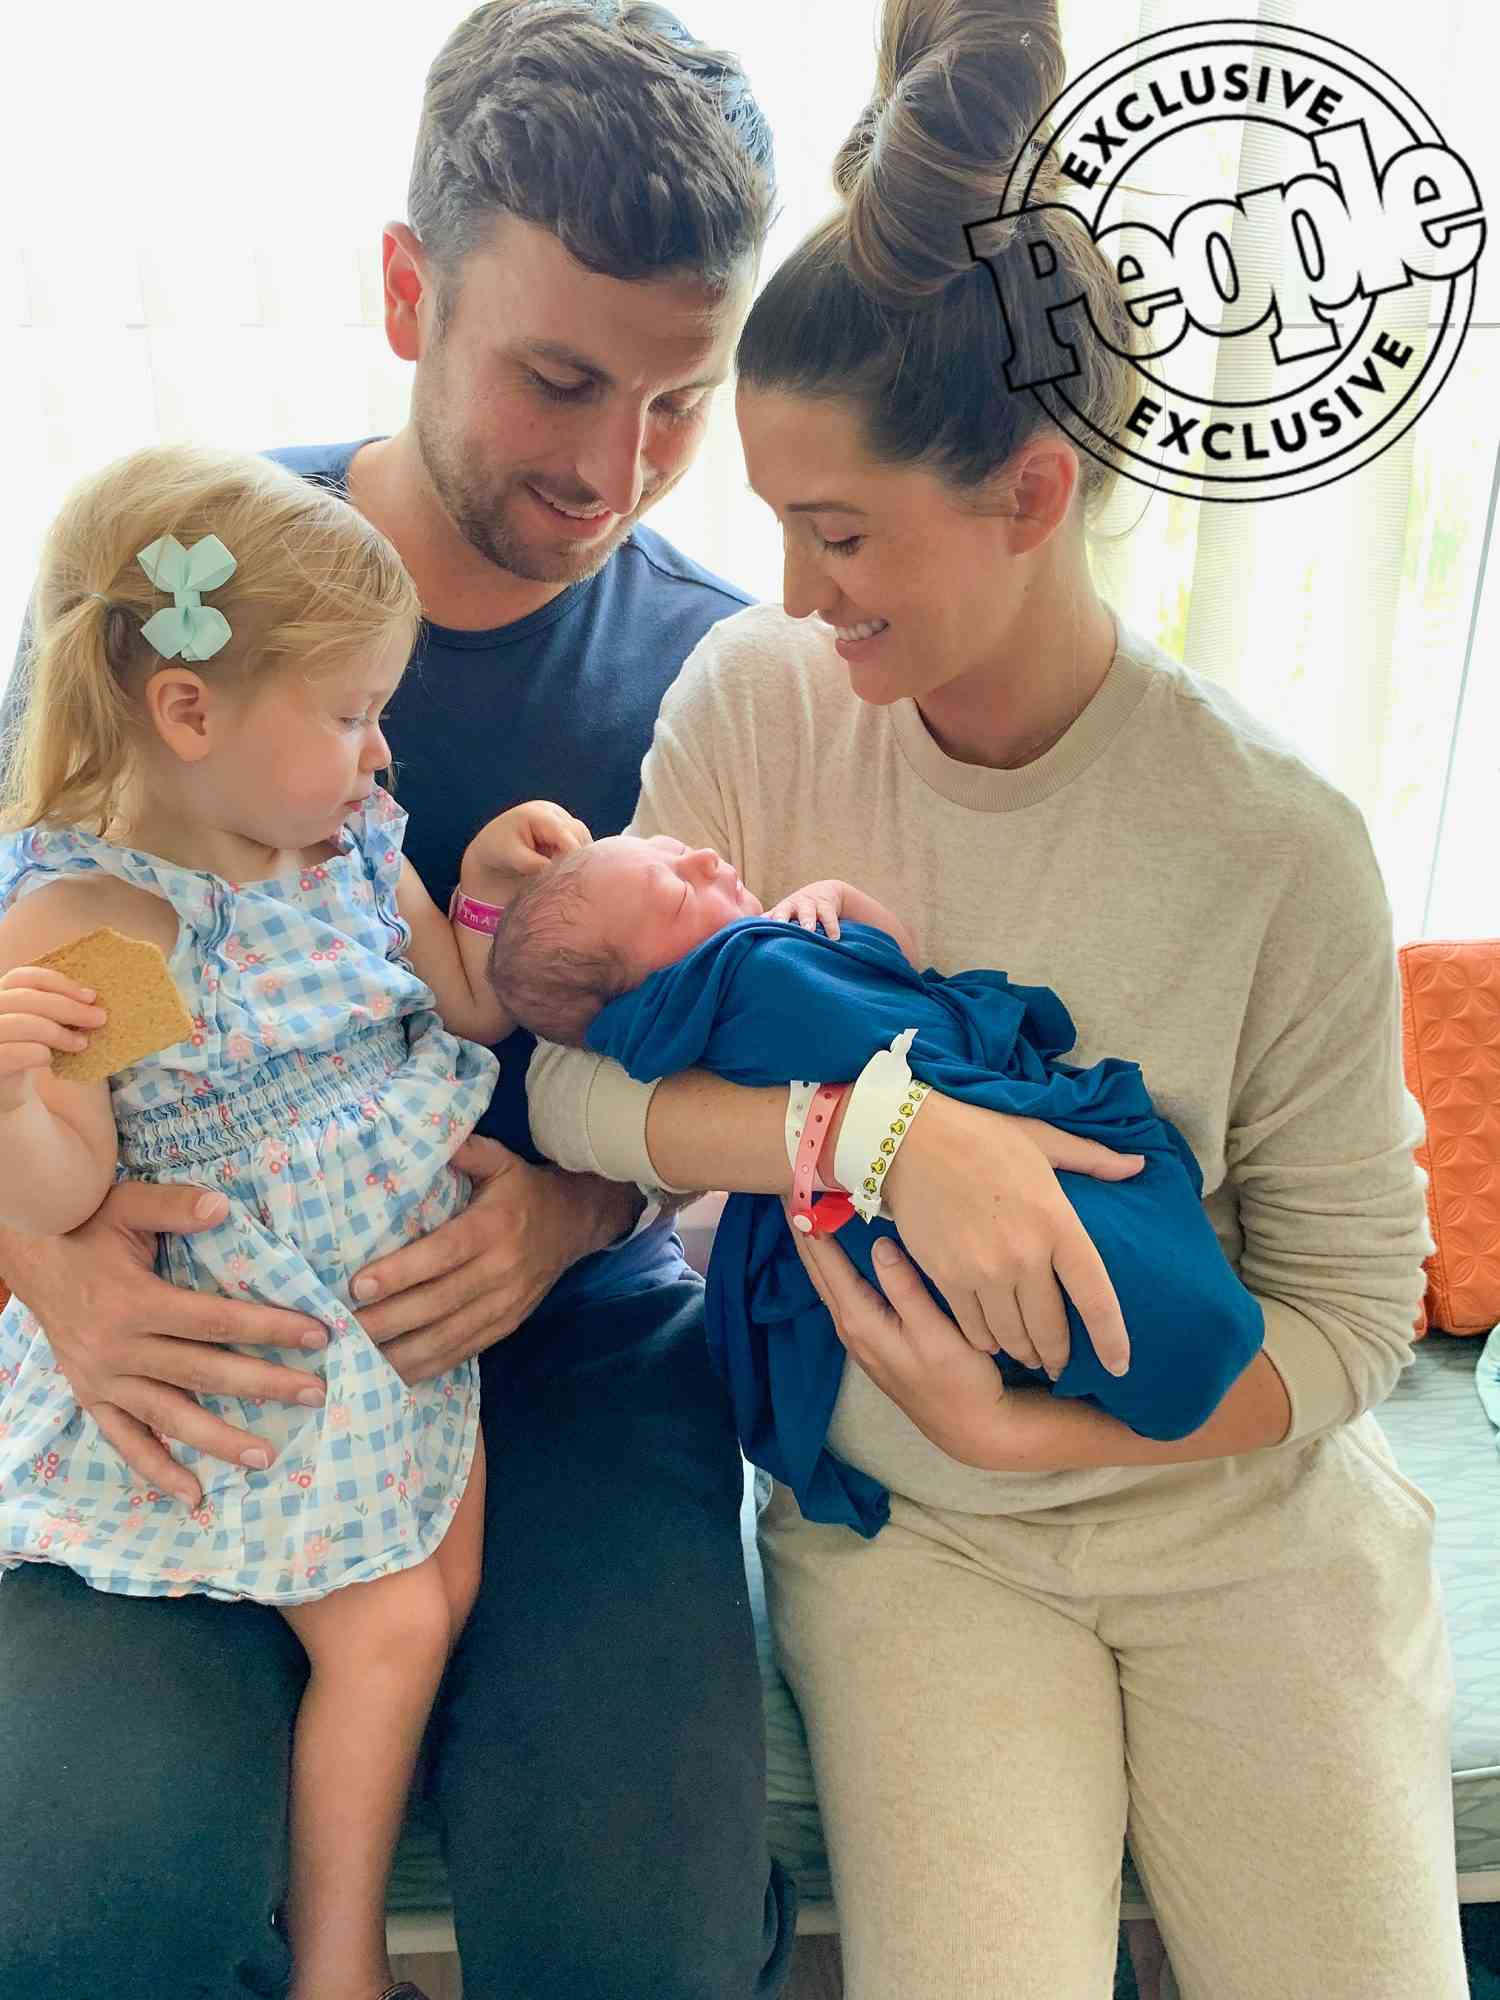 <p>There's a new Bachelor baby in town! Bachelor in Paradise's Jade and Tanner Tolbert welcomed a baby boy on Tuesday, July 30. </p>
                            <p>"We are over the moon for our little guy. He came into this world fast at 7 lbs., 9 oz and 20 in. long," Tanner told PEOPLE exclusively. "Mom and baby boy are doing great. Emmy just met her little brother - she greeted him with a kiss on the head, so I guess that means she will allow us to bring him home! We are officially a family of four!"</p>
                            <p>After announcing the happy news, Jade opened up on Instagram about the terrifying way she welcomed her baby boy into the world.</p>
                            <p>"I accidentally gave birth at home last night, in our master closet," Jade wrote alongside a photo, which shows her cuddling the newborn as paramedics and members of her family surrounded her.</p>
                            <p>"I've been still processing the shock of this all, as this was not all at what I had planned, but I am so so thankful for each person who helped bring our son into the world safely."</p>
                            <p>Tanner sweetly responded to the post, writing, "You. Are. Amazing."</p>
                            